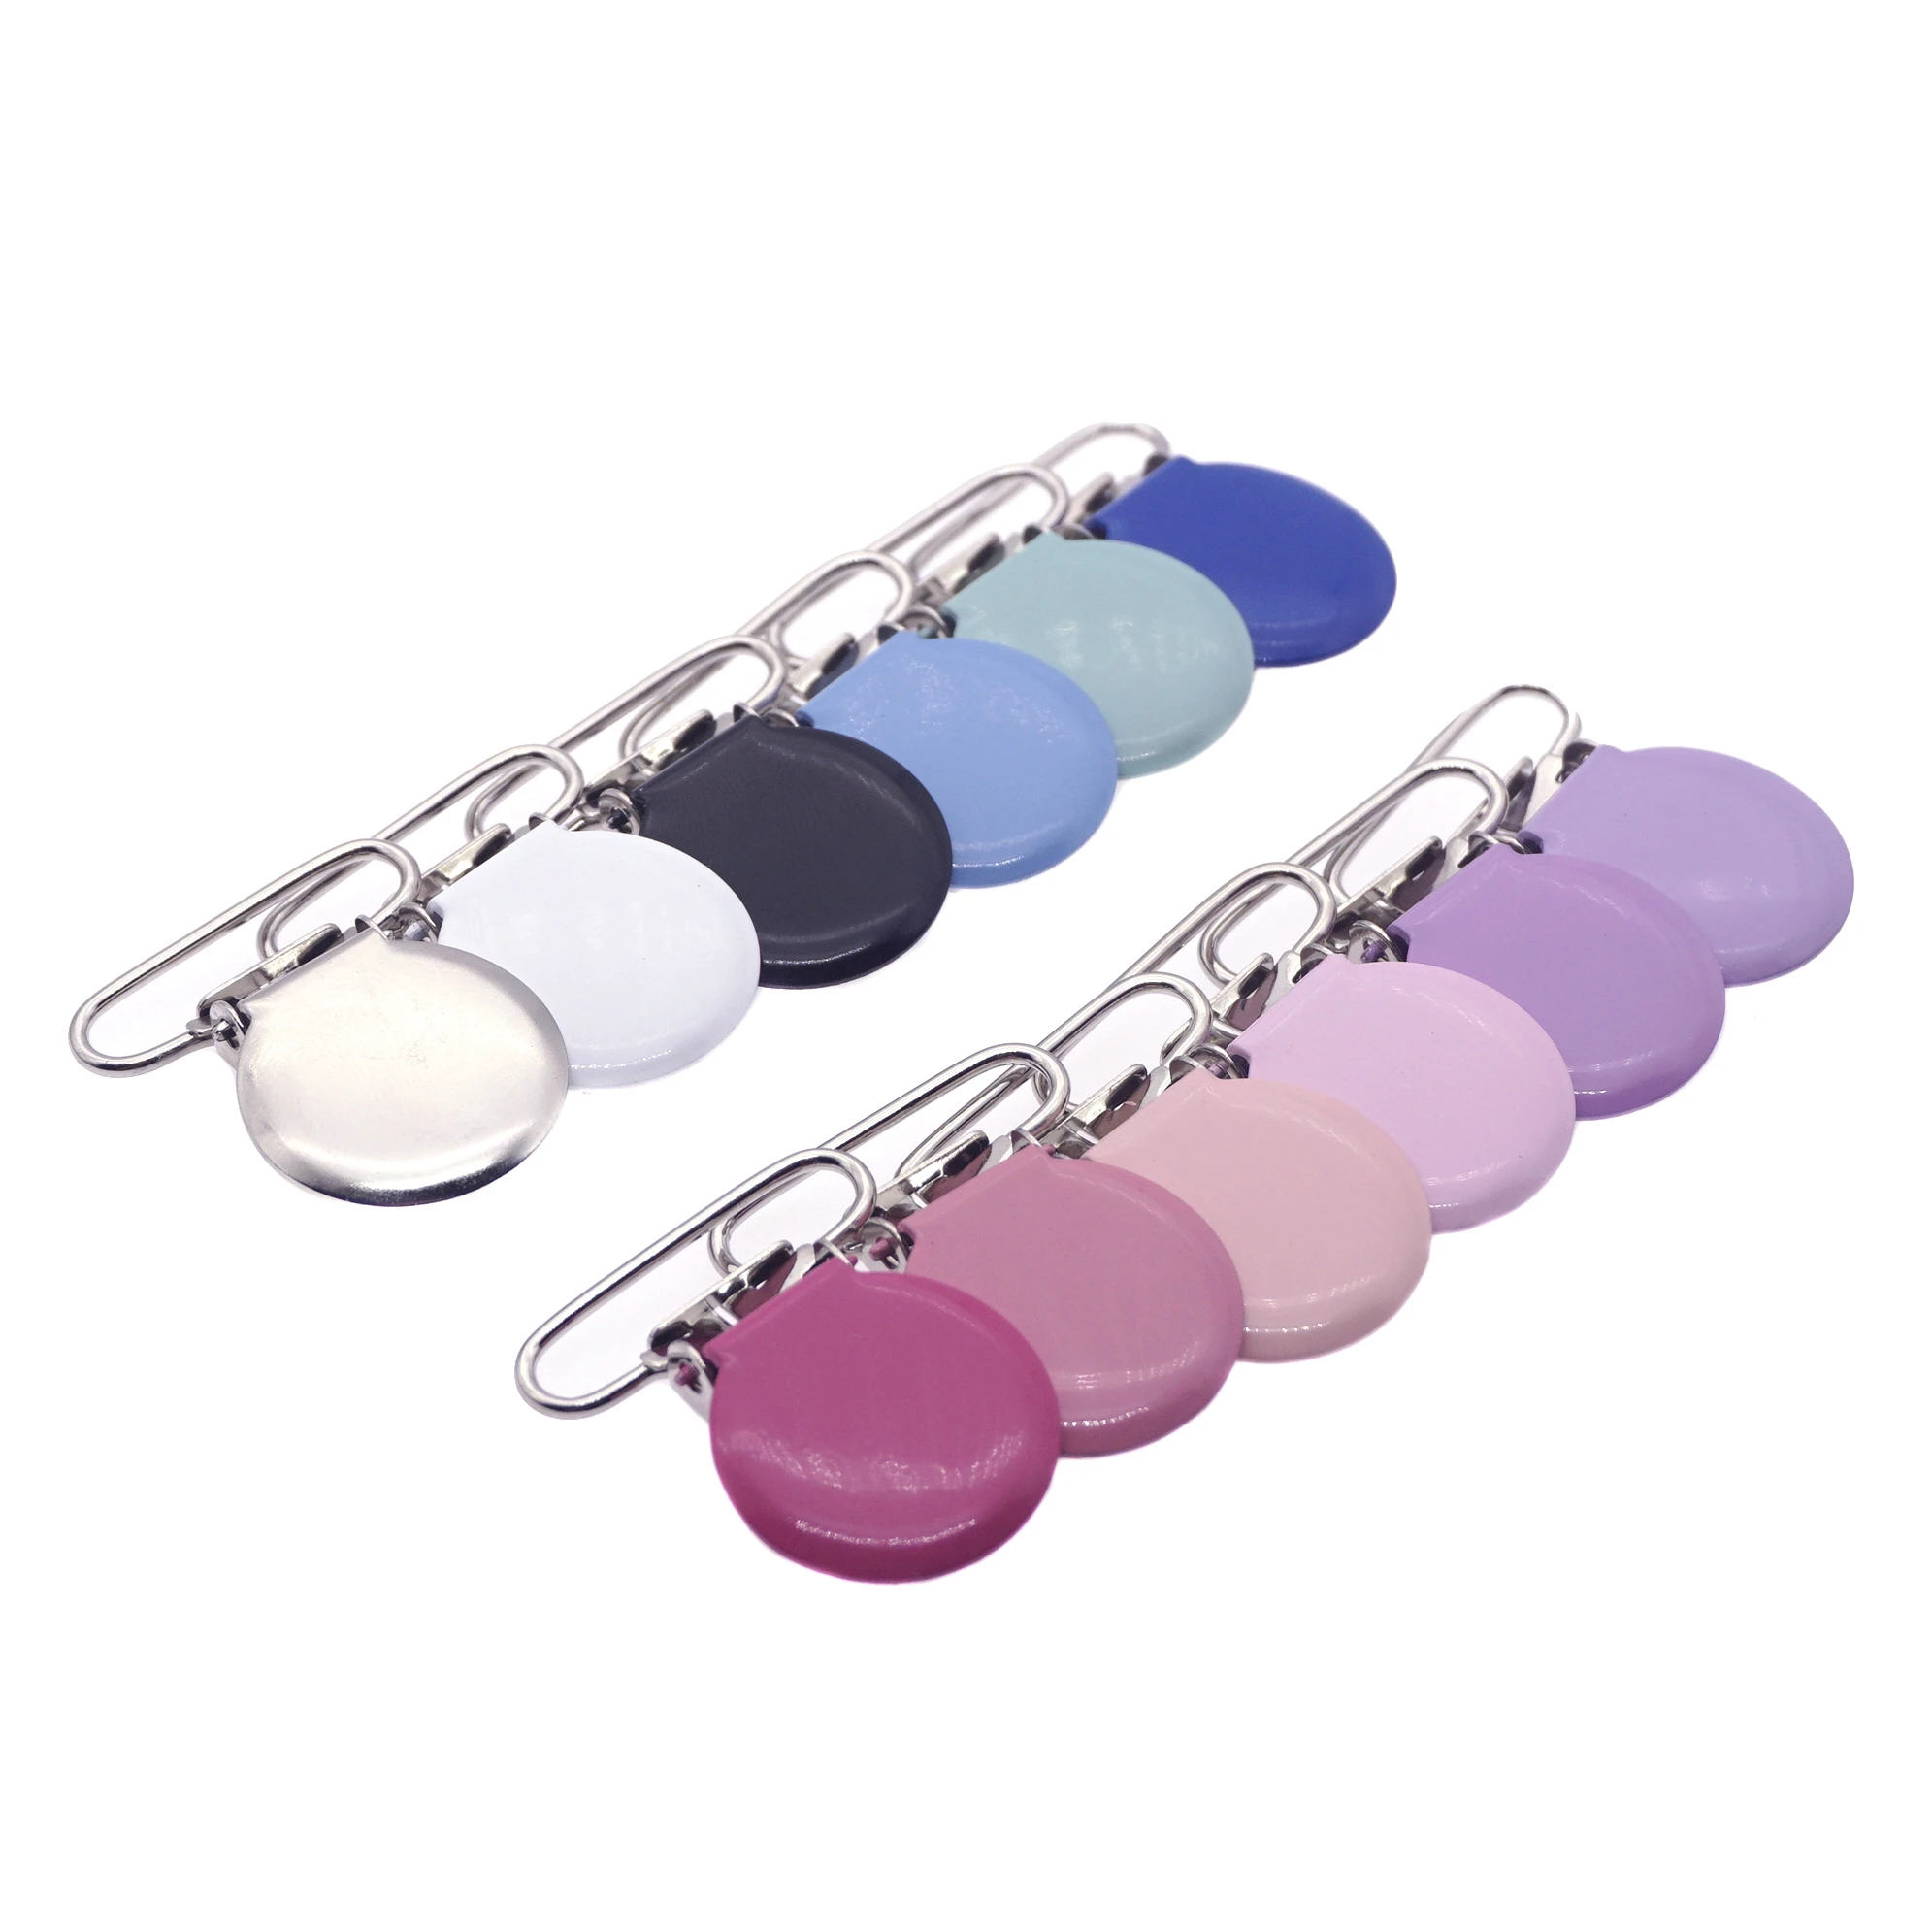 1'' 25mm 21 Colors Metal Pacifier Garment Enamel Round Shape Suspender Clips Sutoyuen Dummy Soother Toy Pacifier Clips 1000pc